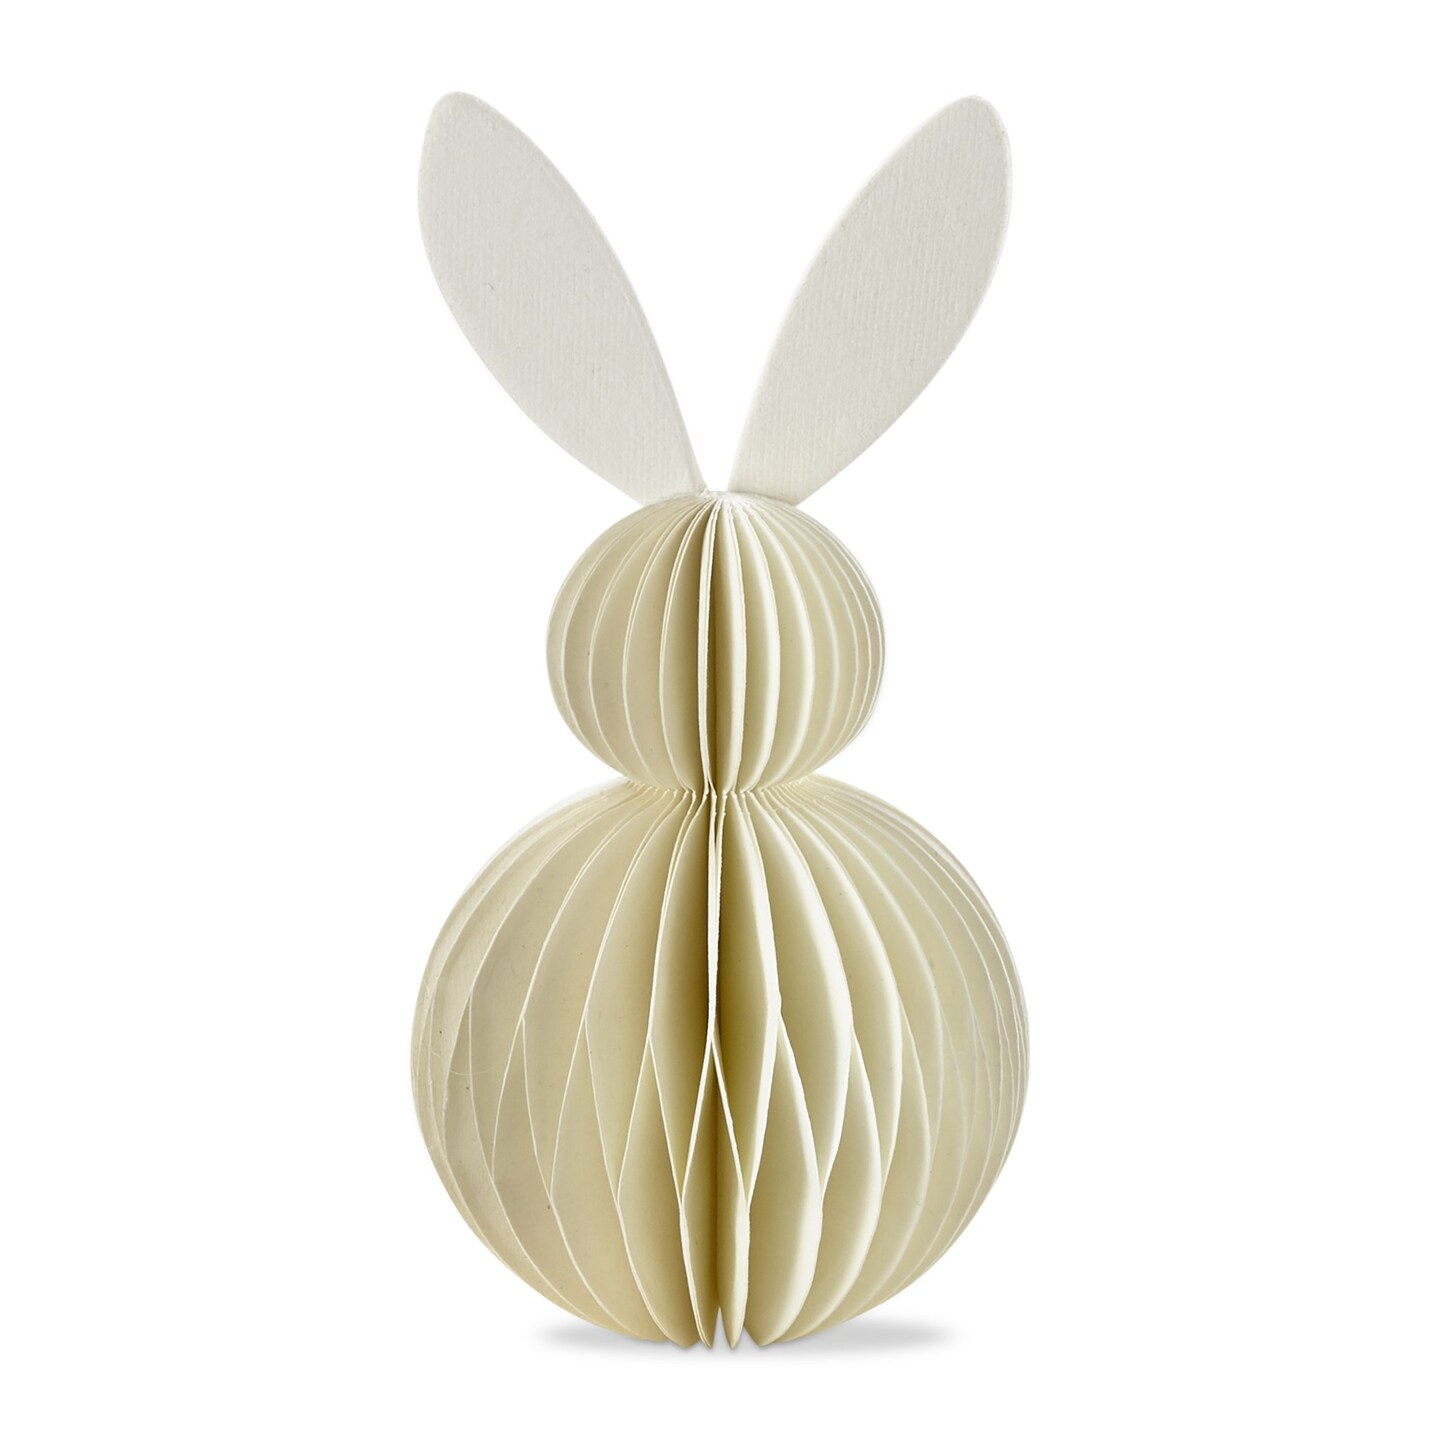 Easter Ivory Bunny Paper Standing Decor Small, 3.25L x 3.25W x 6.25H inches